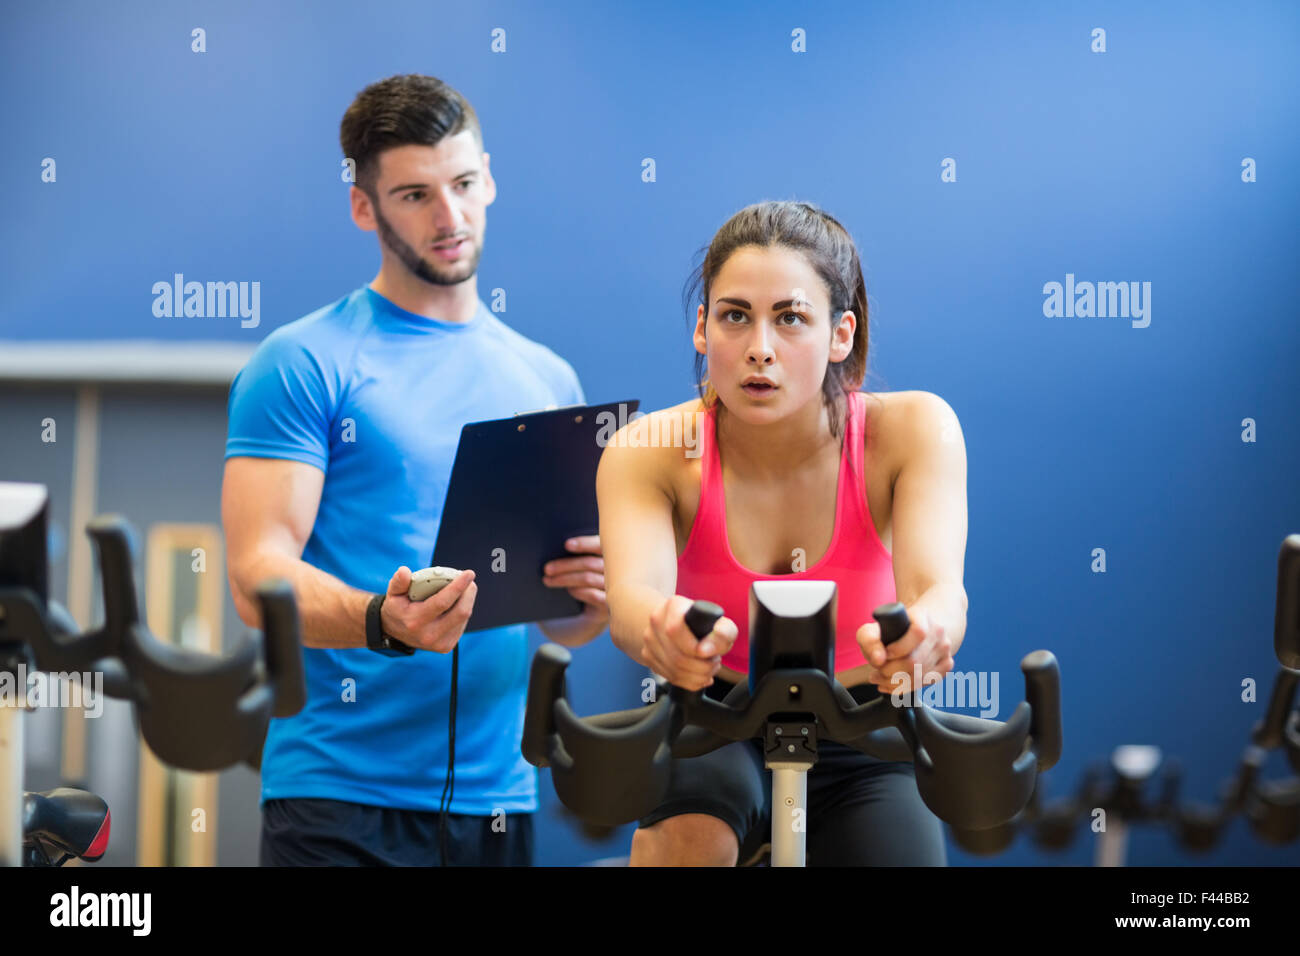 Woman on exercise bike with trainer timing her Stock Photo